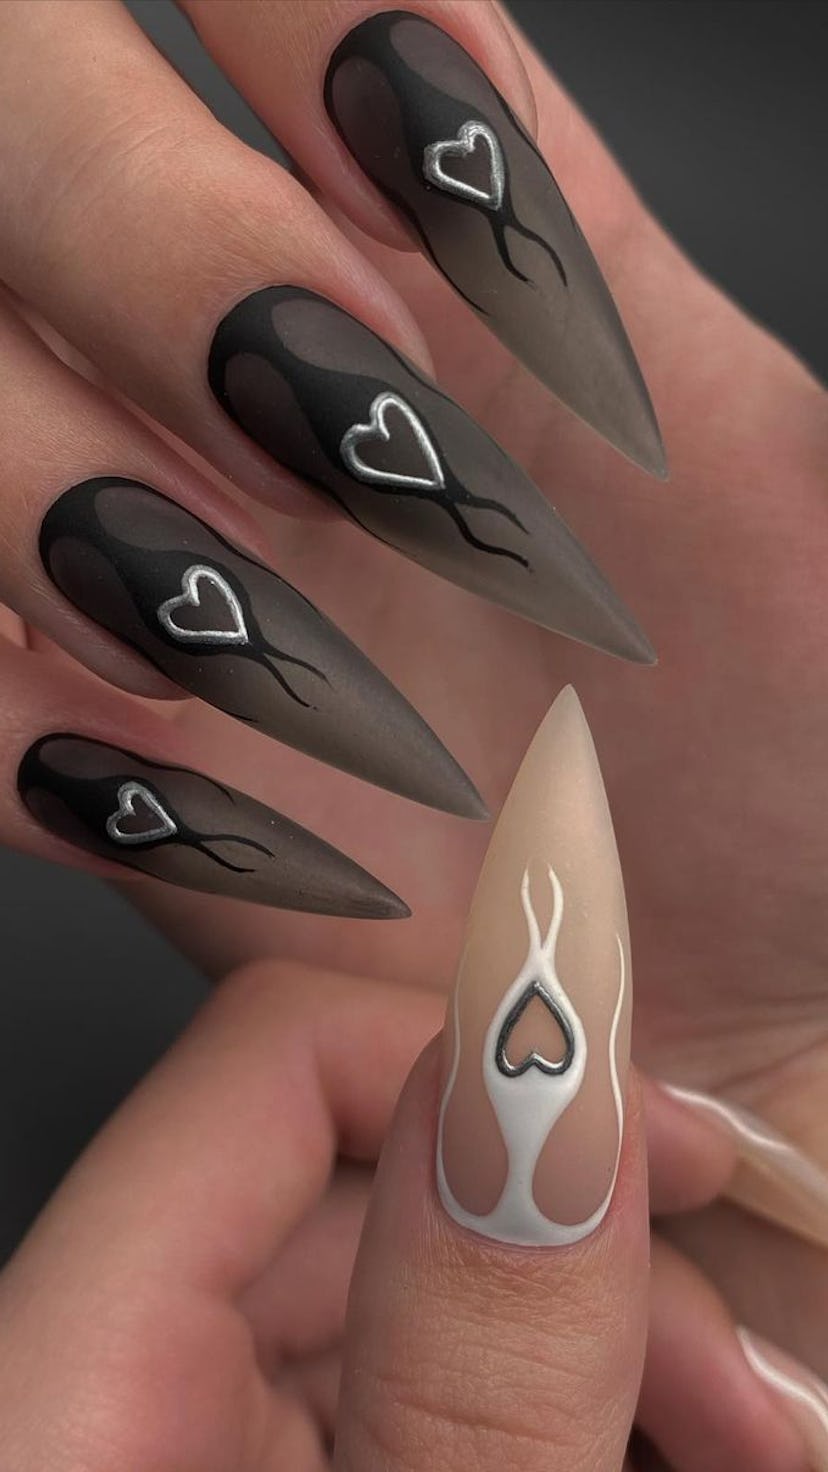 Long black nails with silver hearts inspired by the horoscope sign of Scorpio.